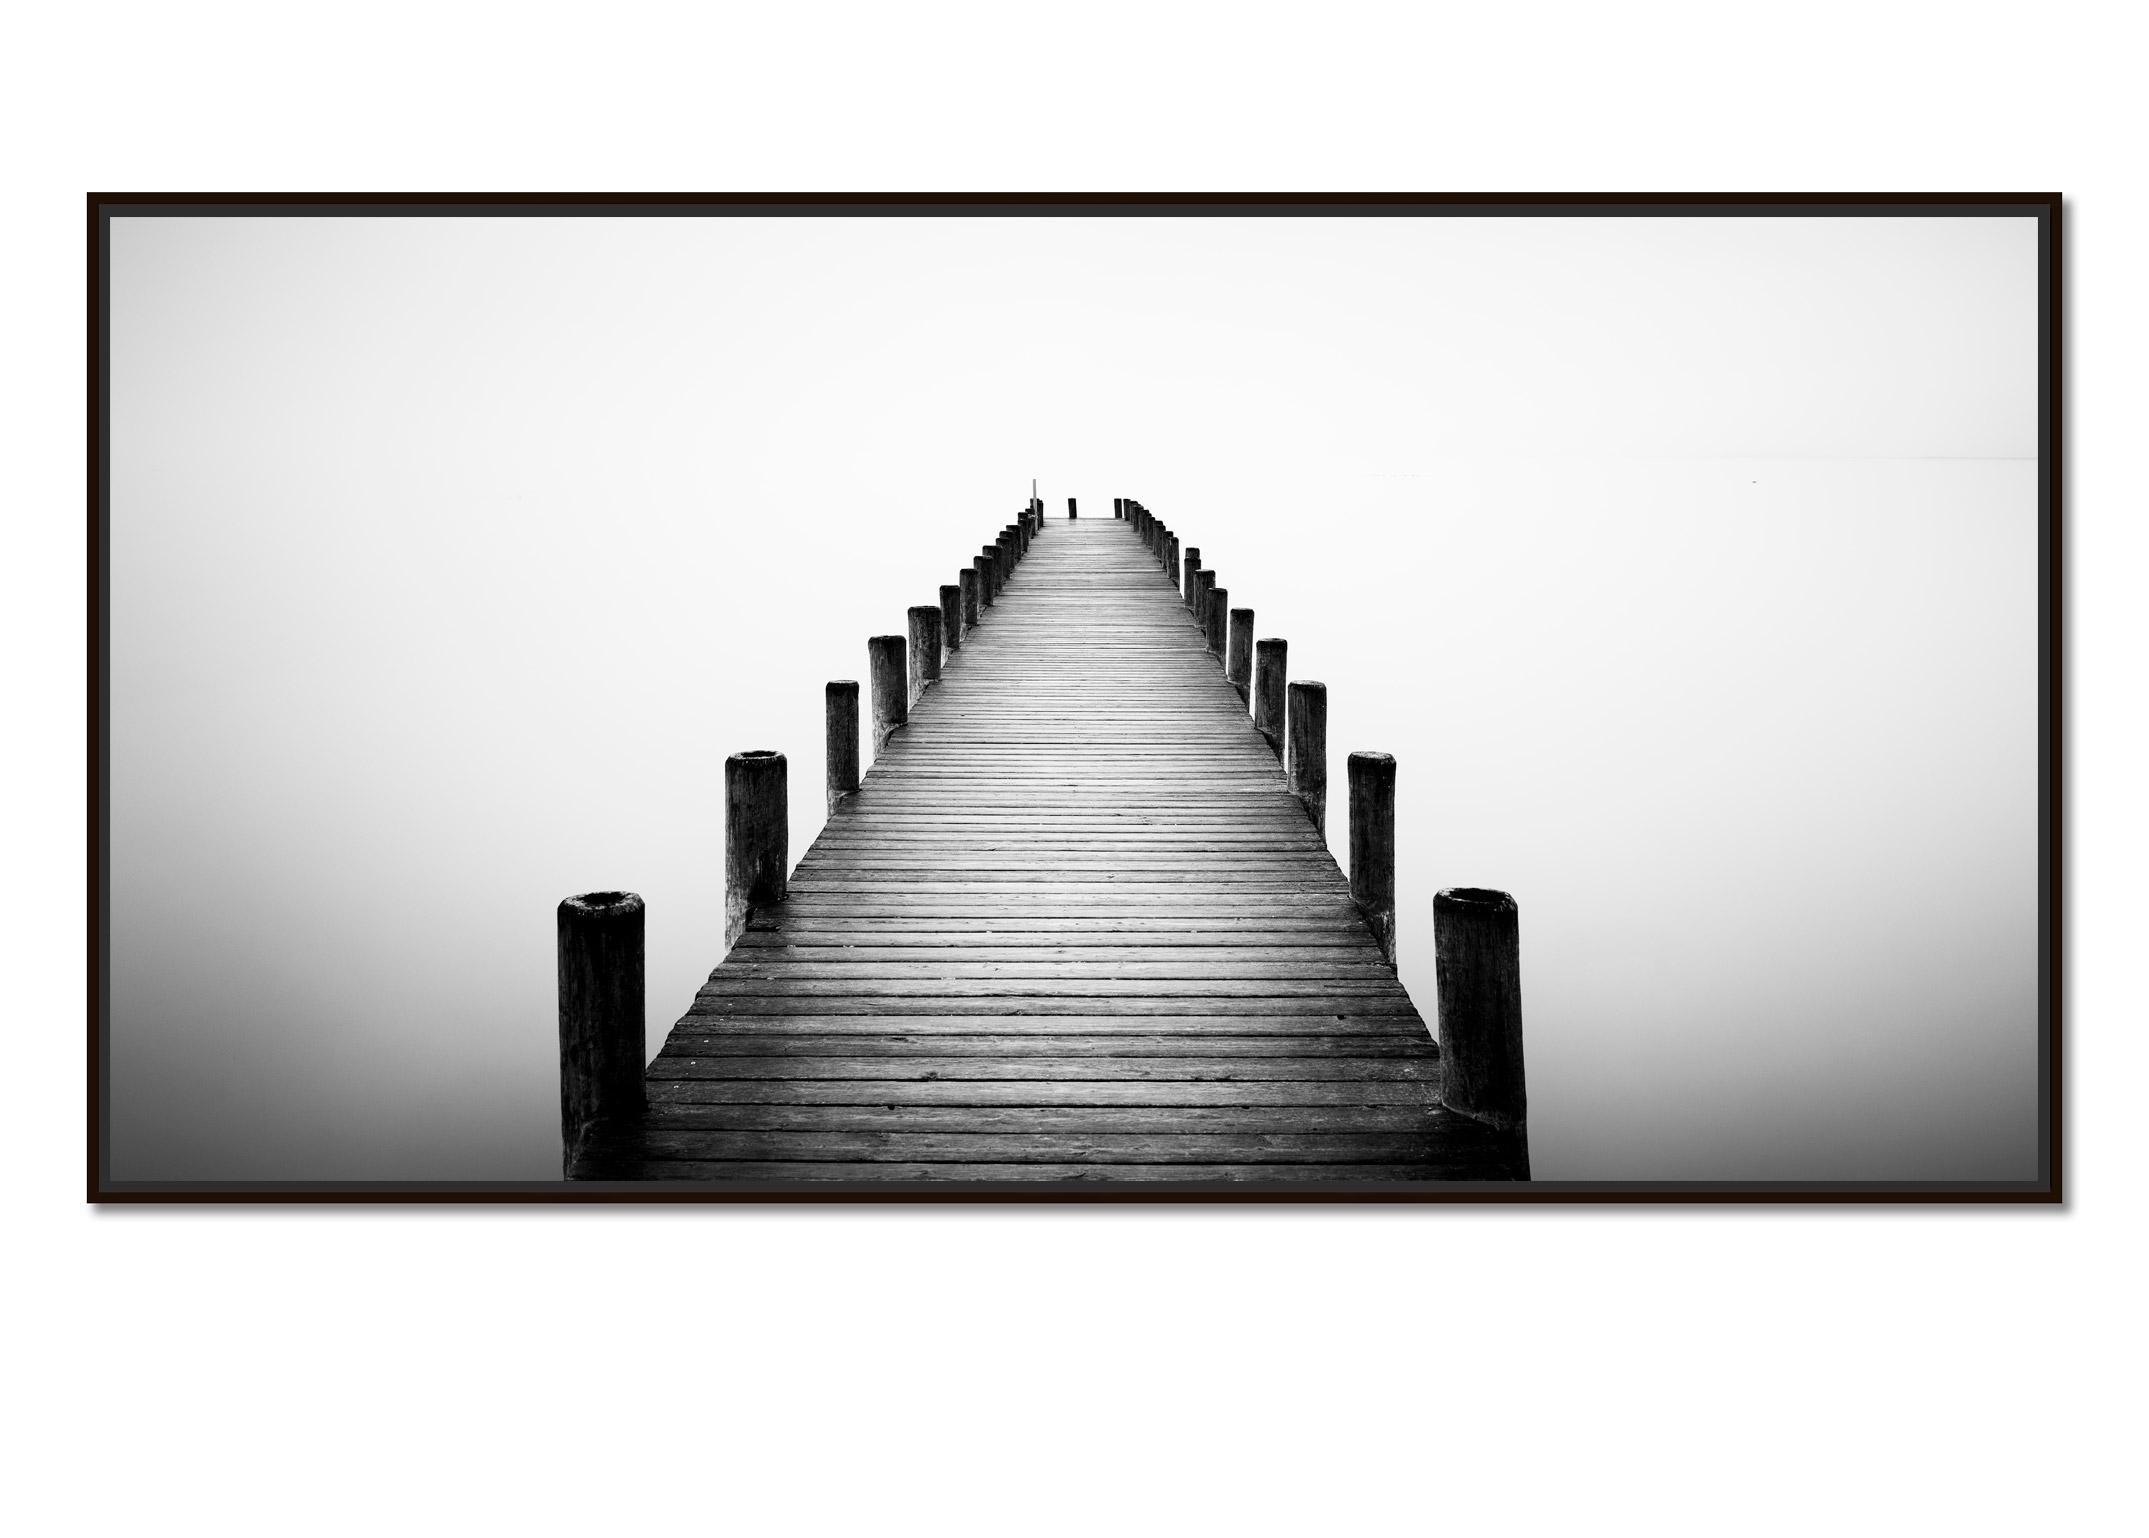 Pier on misty Lake Panorama, black and white long exposure waterscape art photo - Photograph by Gerald Berghammer